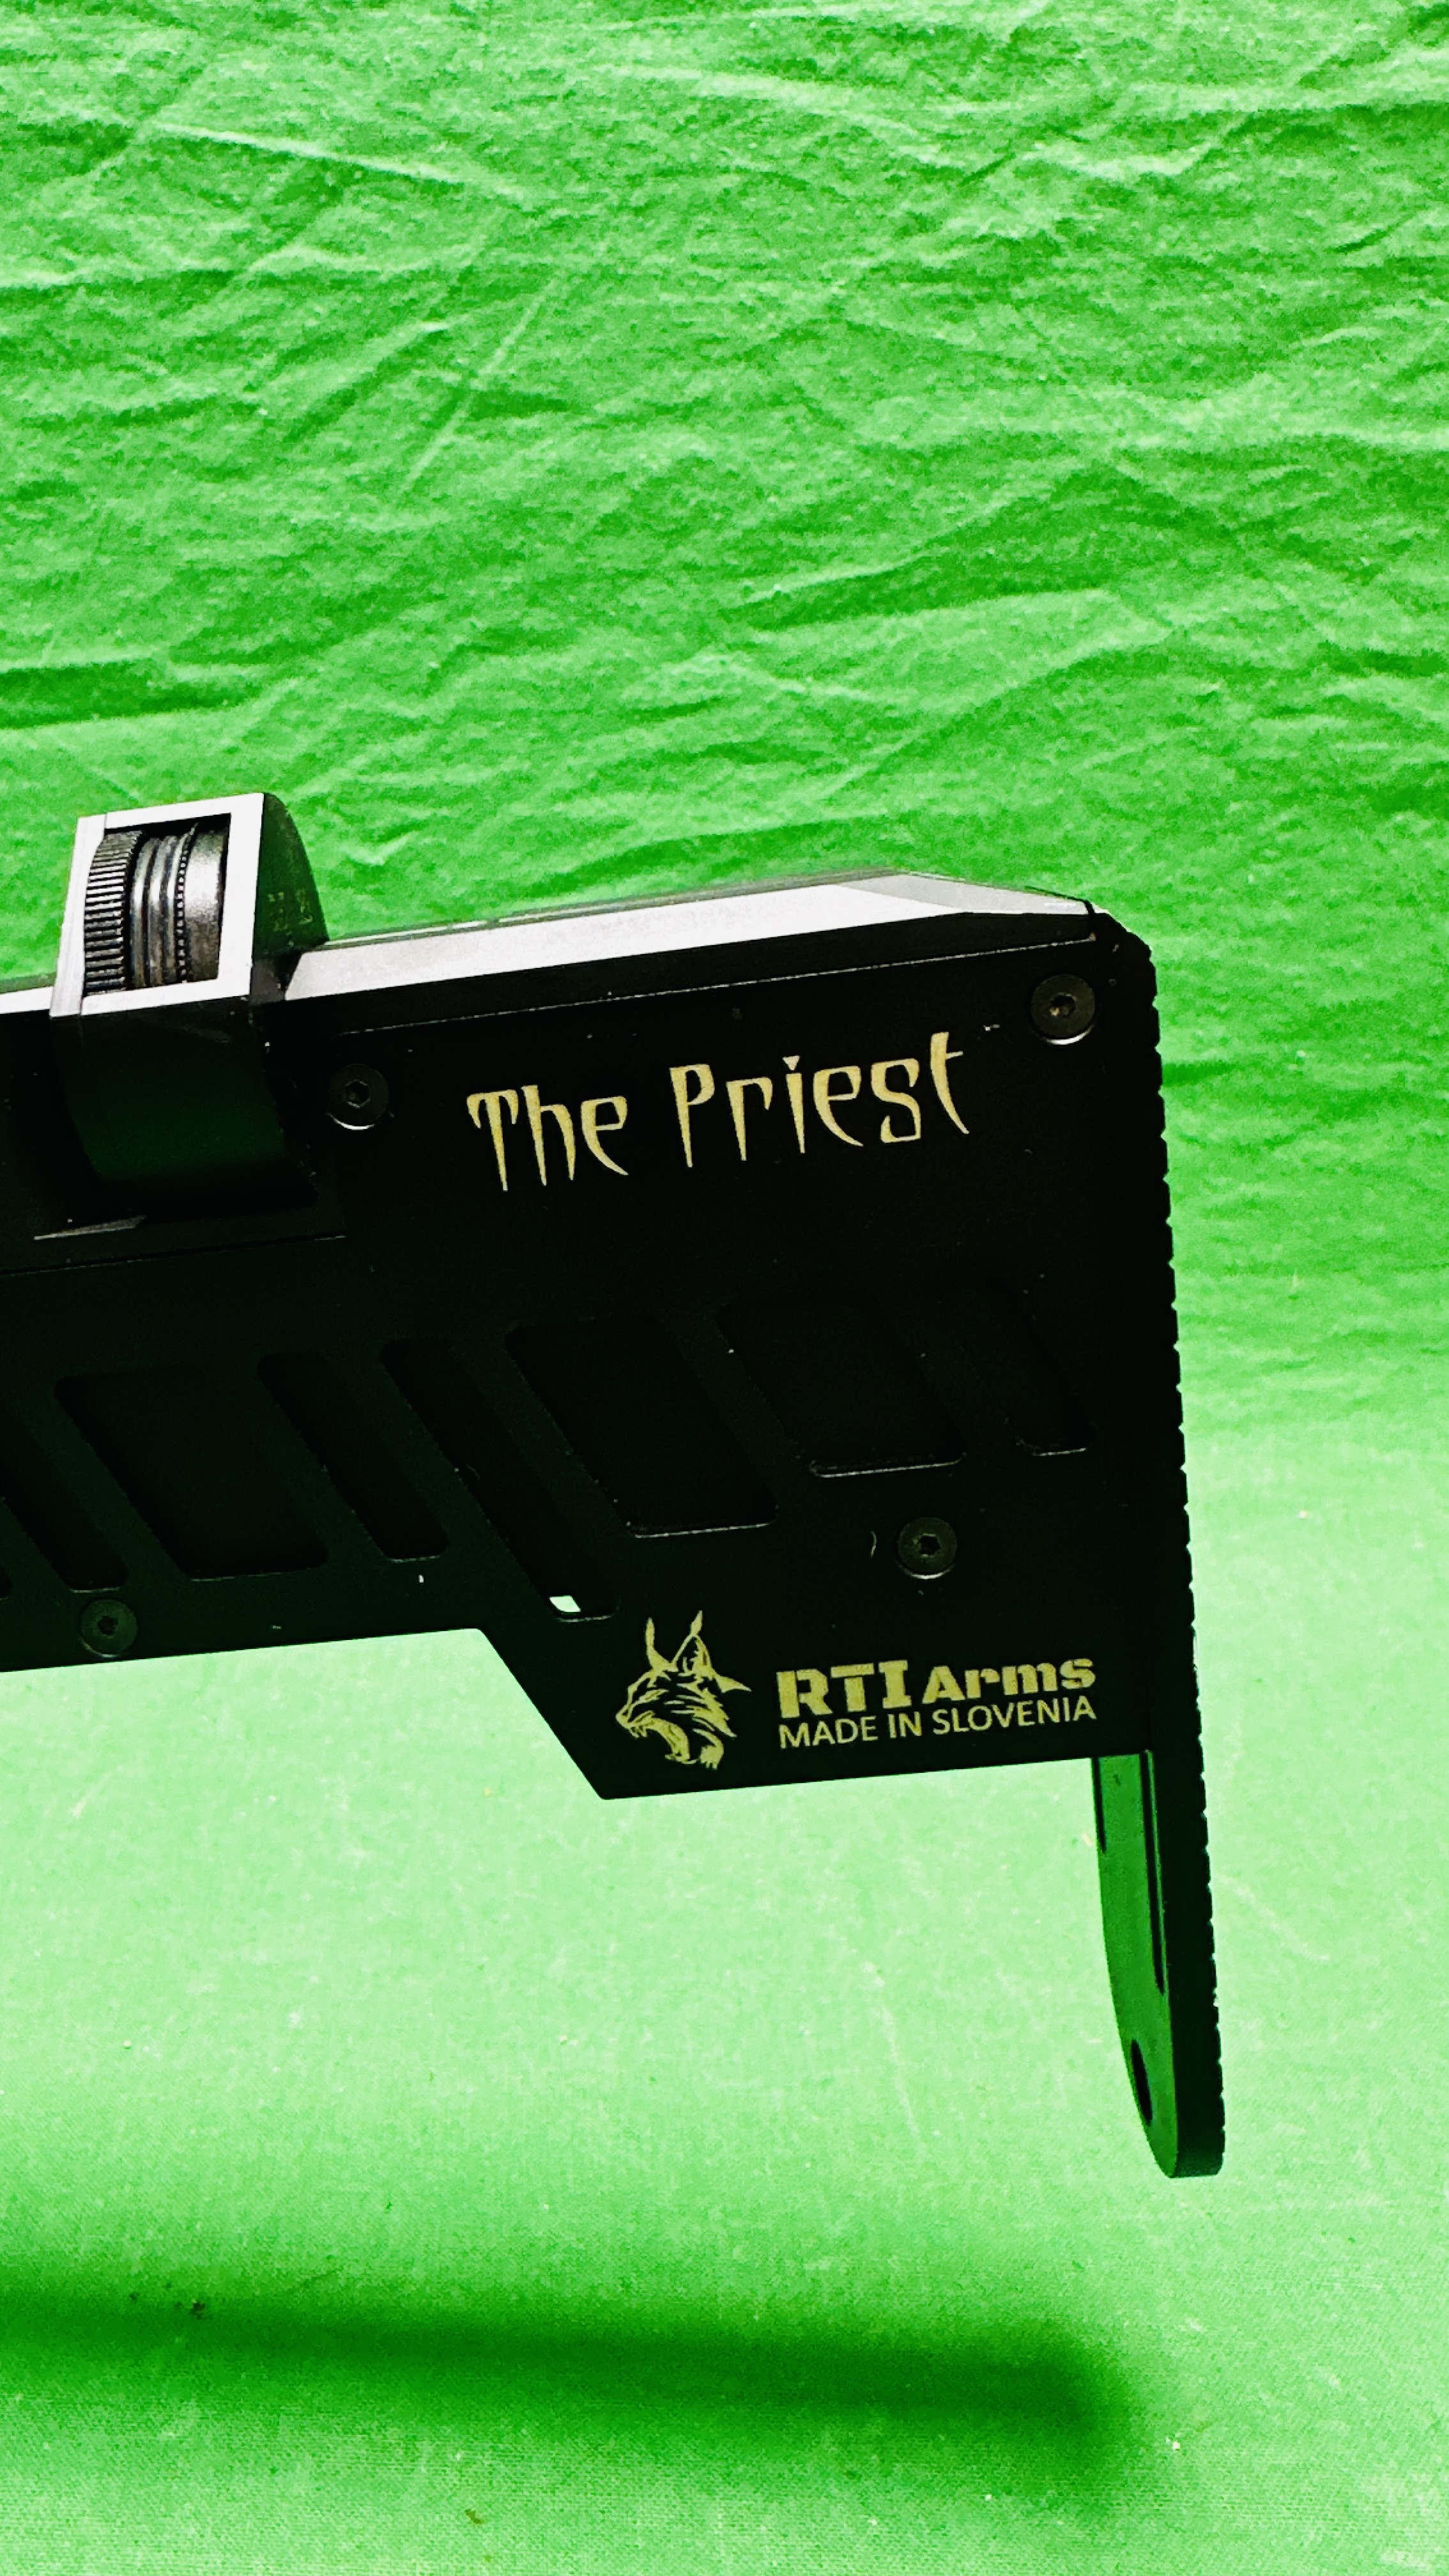 RTI ARMS "THE PRIEST" . - Image 3 of 14